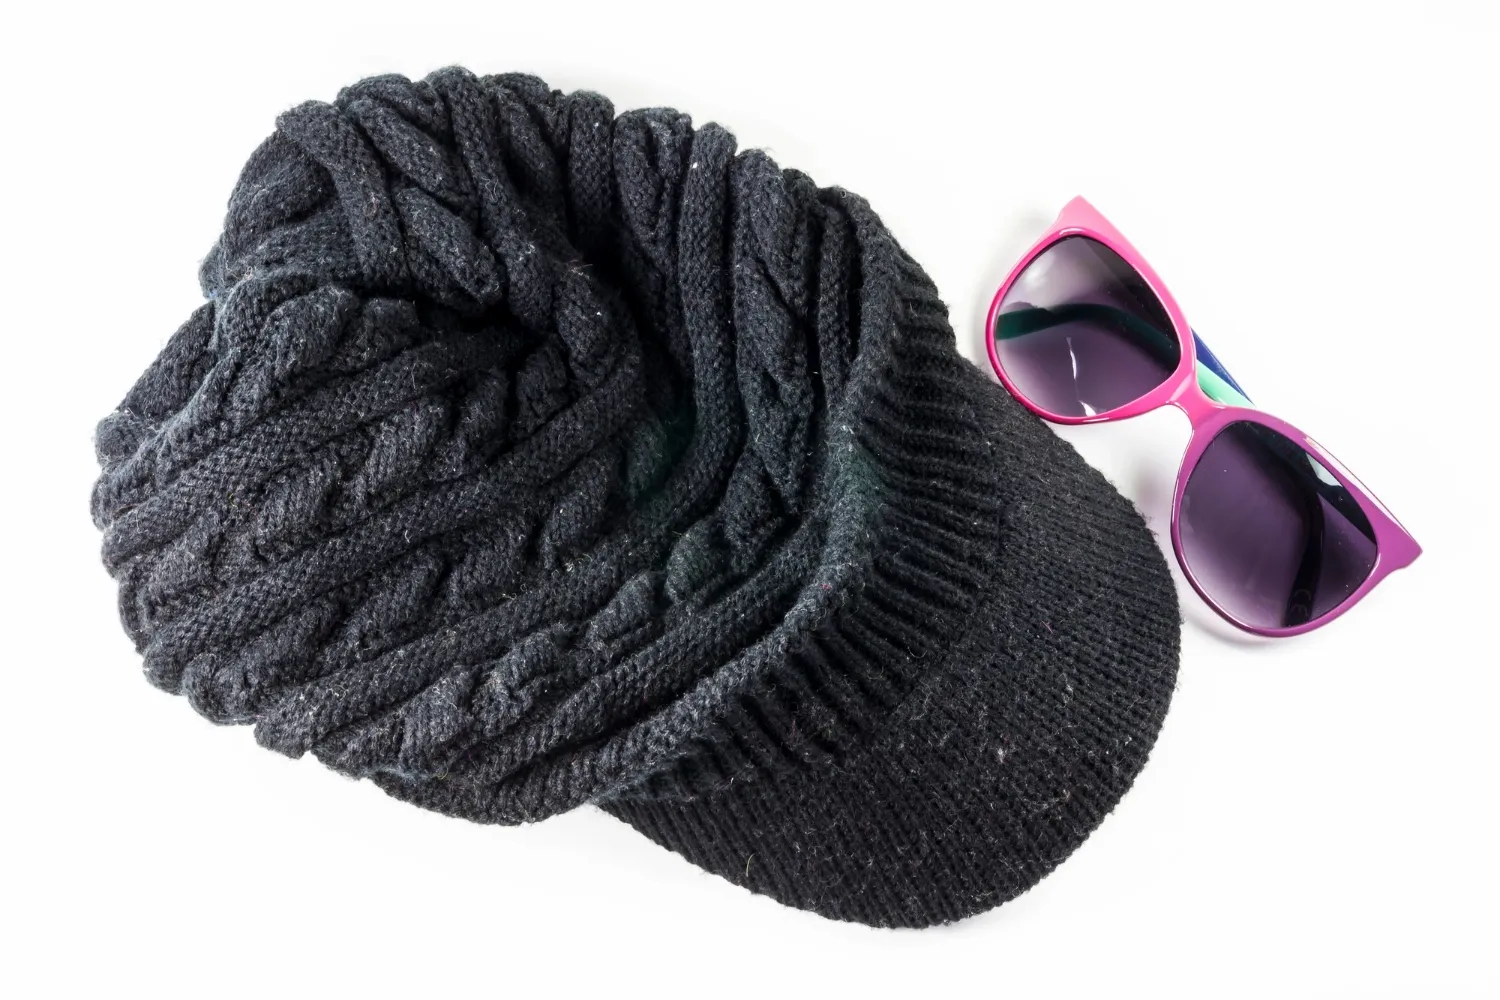 Black knitting wool hats and sunglasses on white